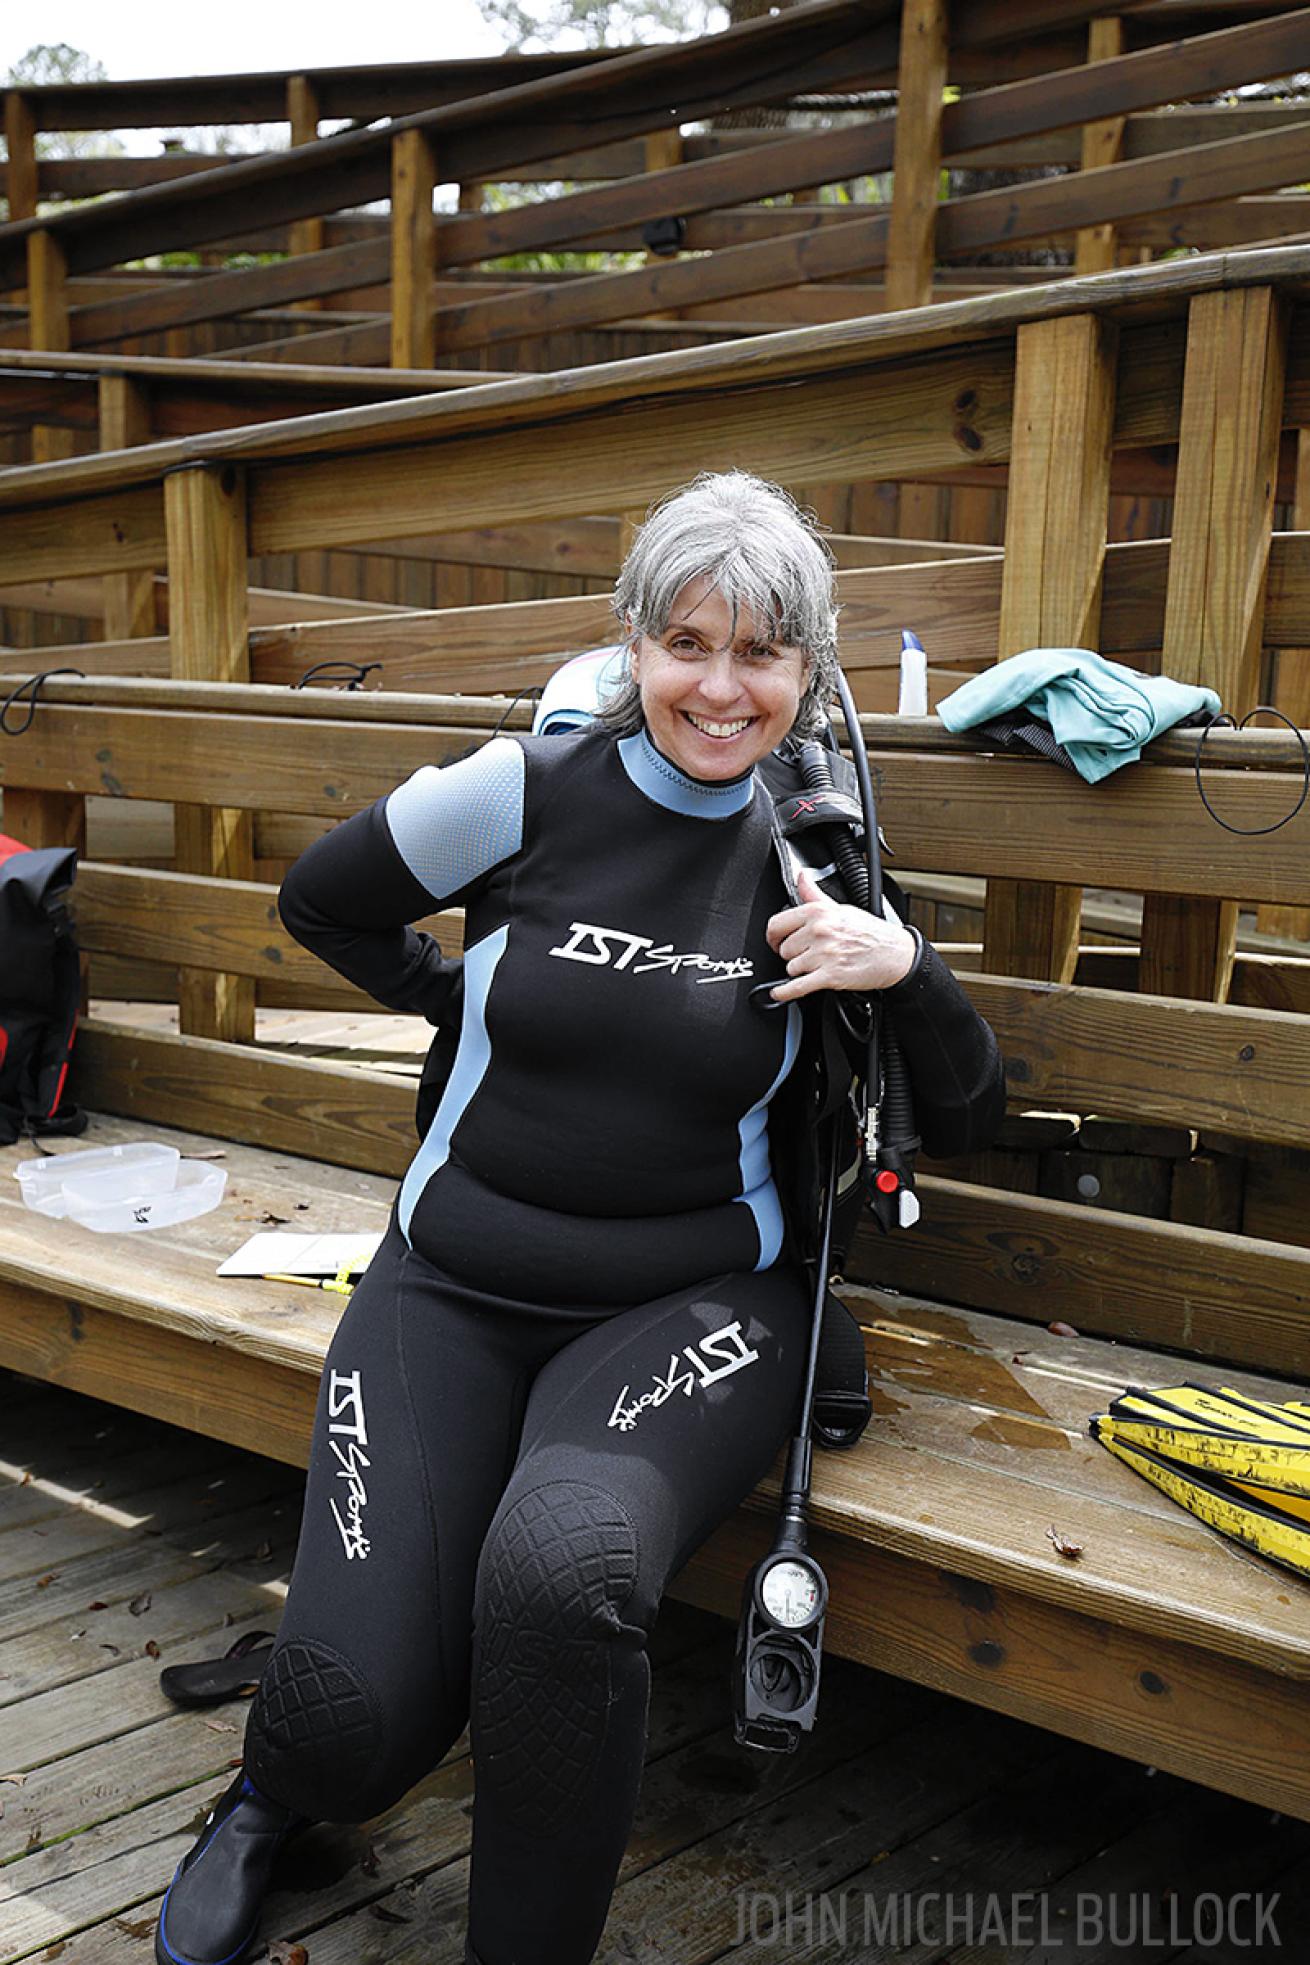 Scuba diver dons gear for ScubaLab BC test at Blue Grotto